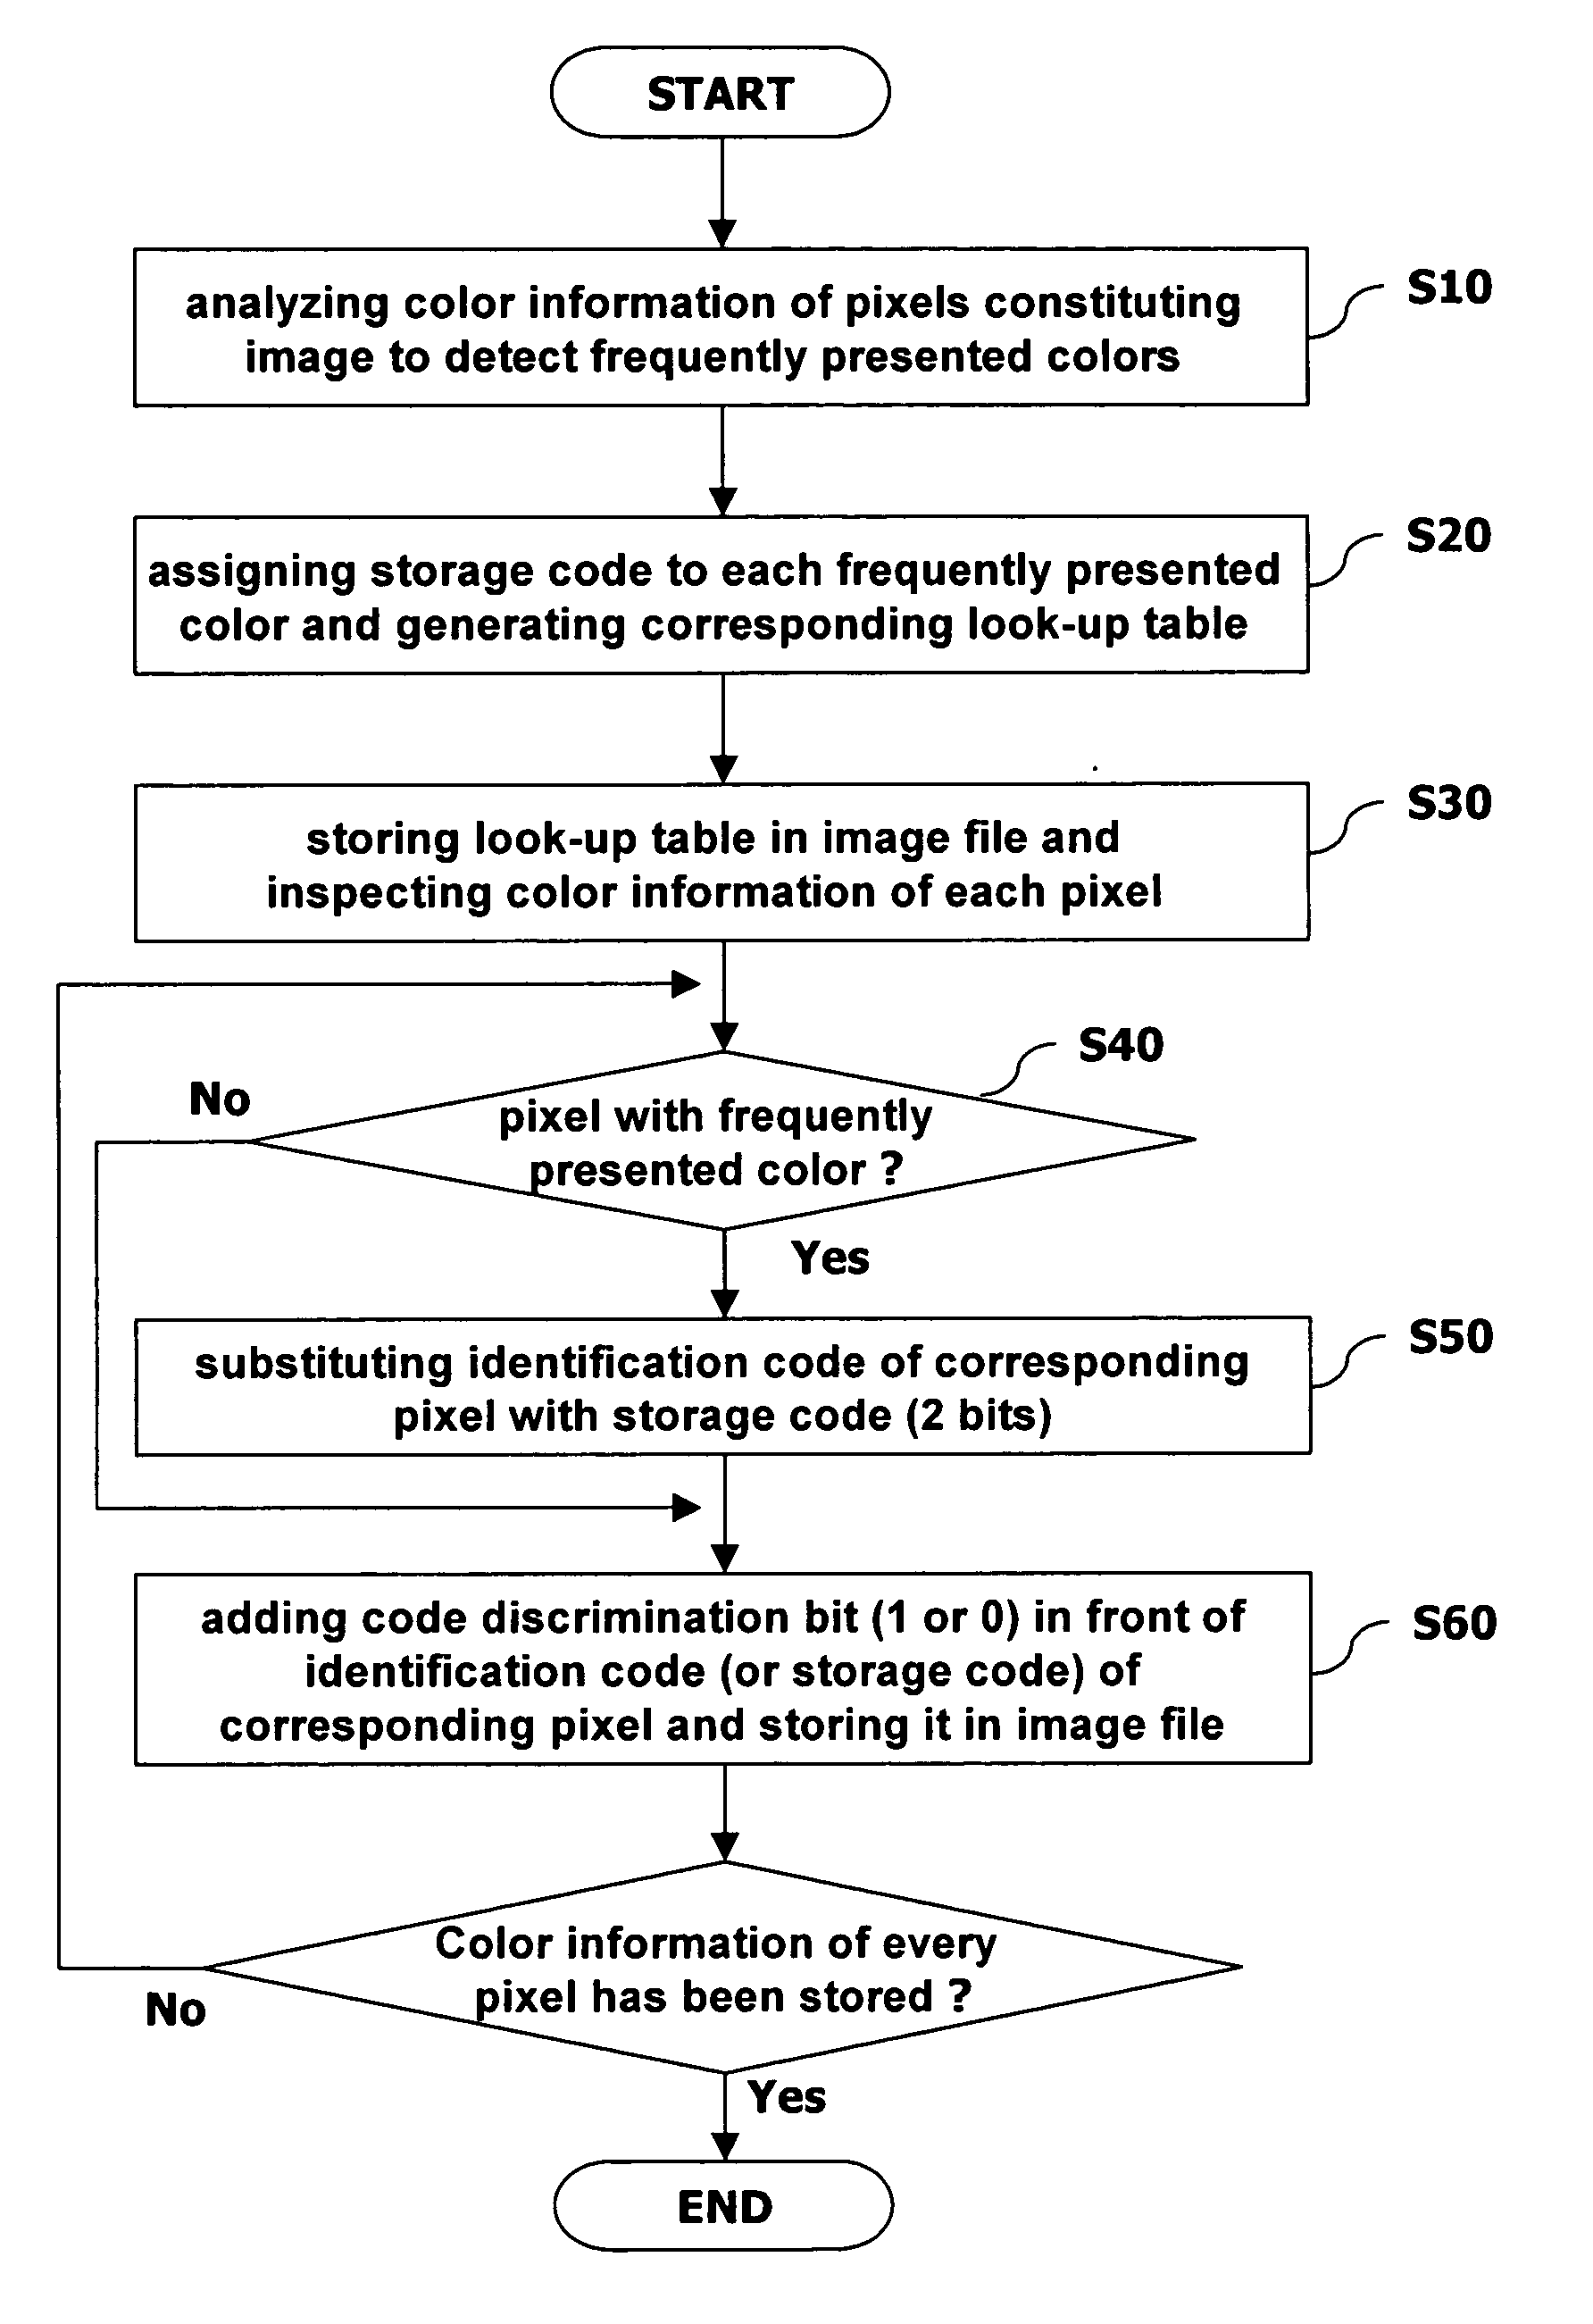 Compressing and decompressing image of a mobile communication terminal